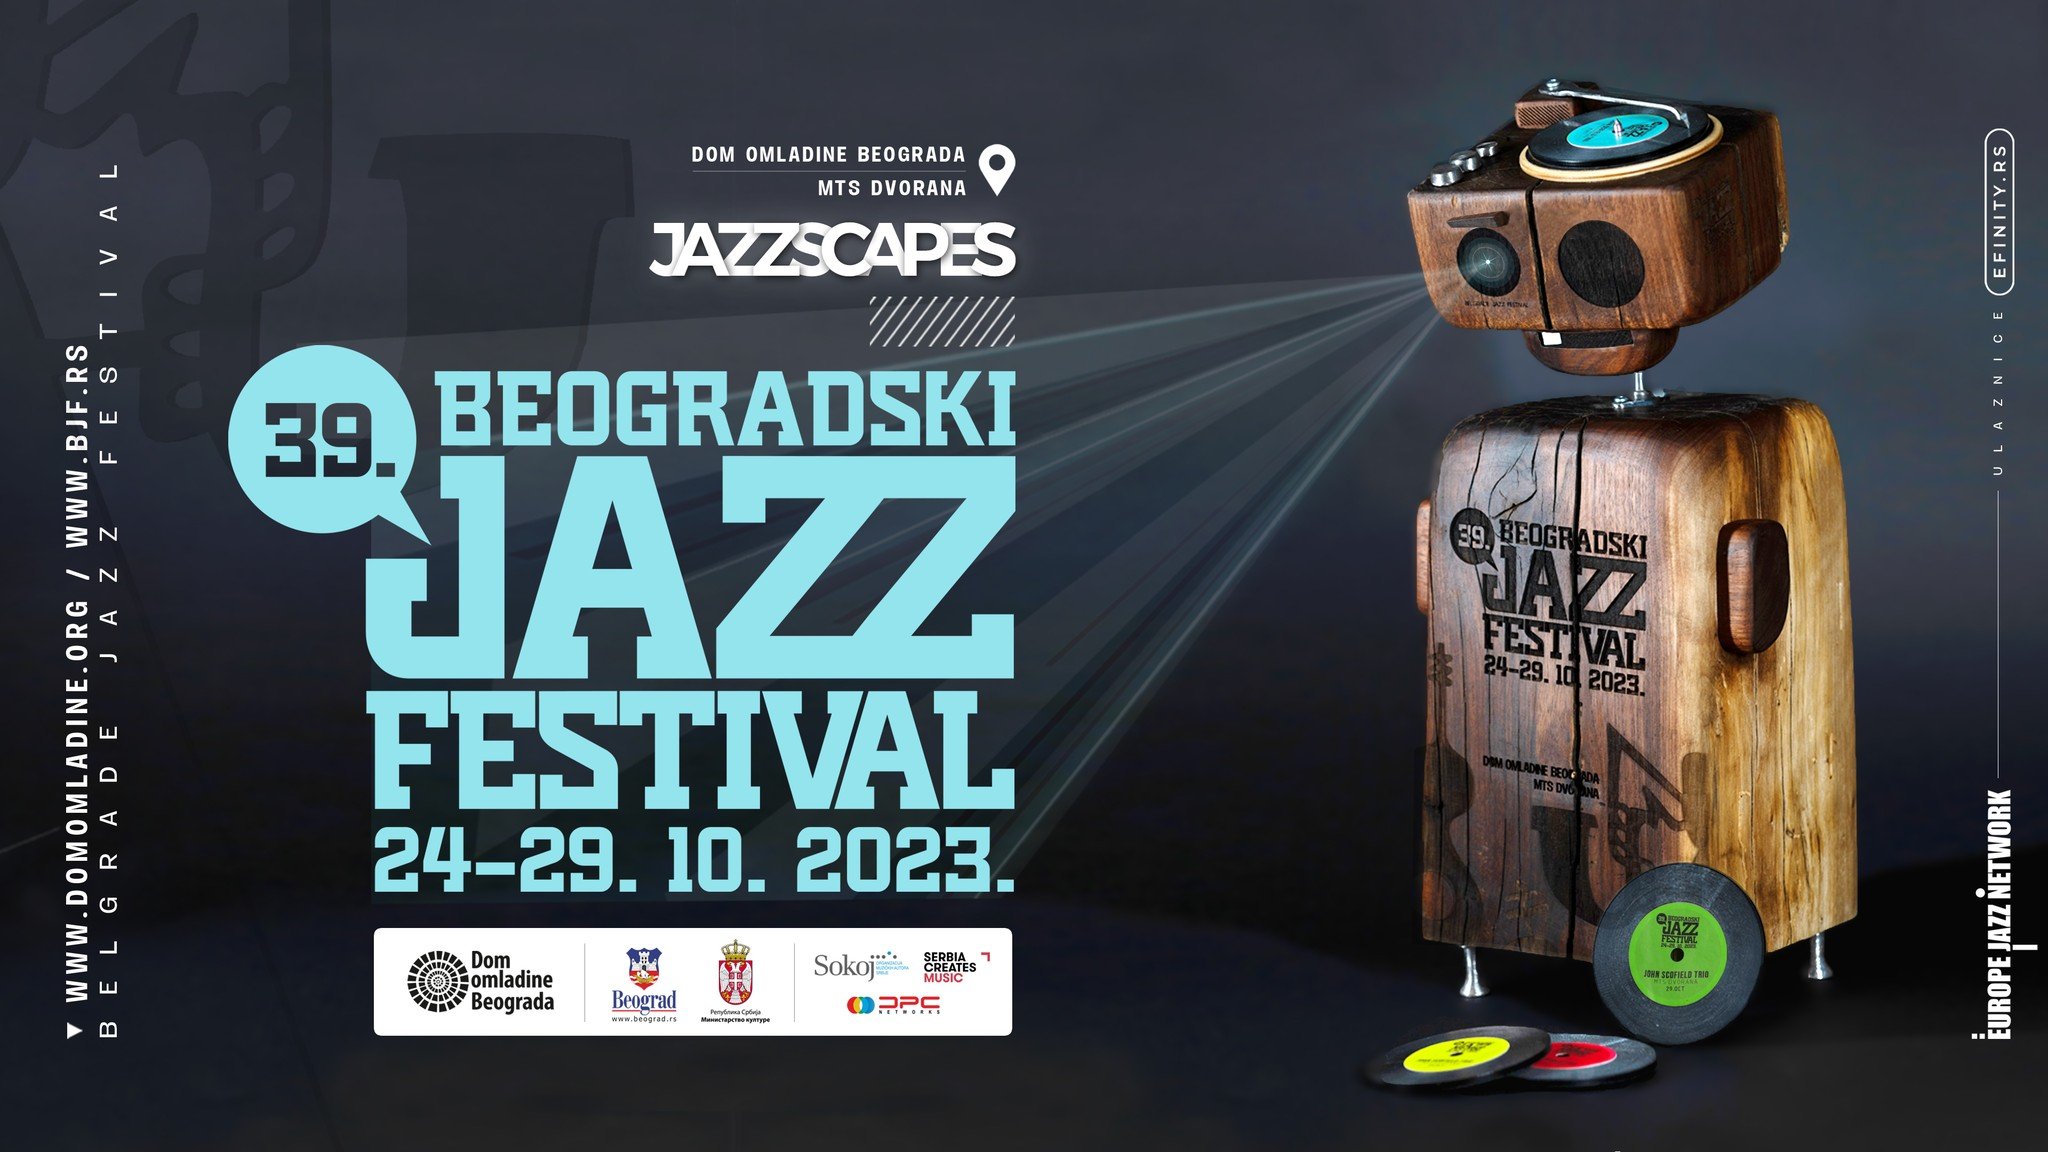 Belgrade Jazz Festival 2023 Exploring the Jazzscapes of the World